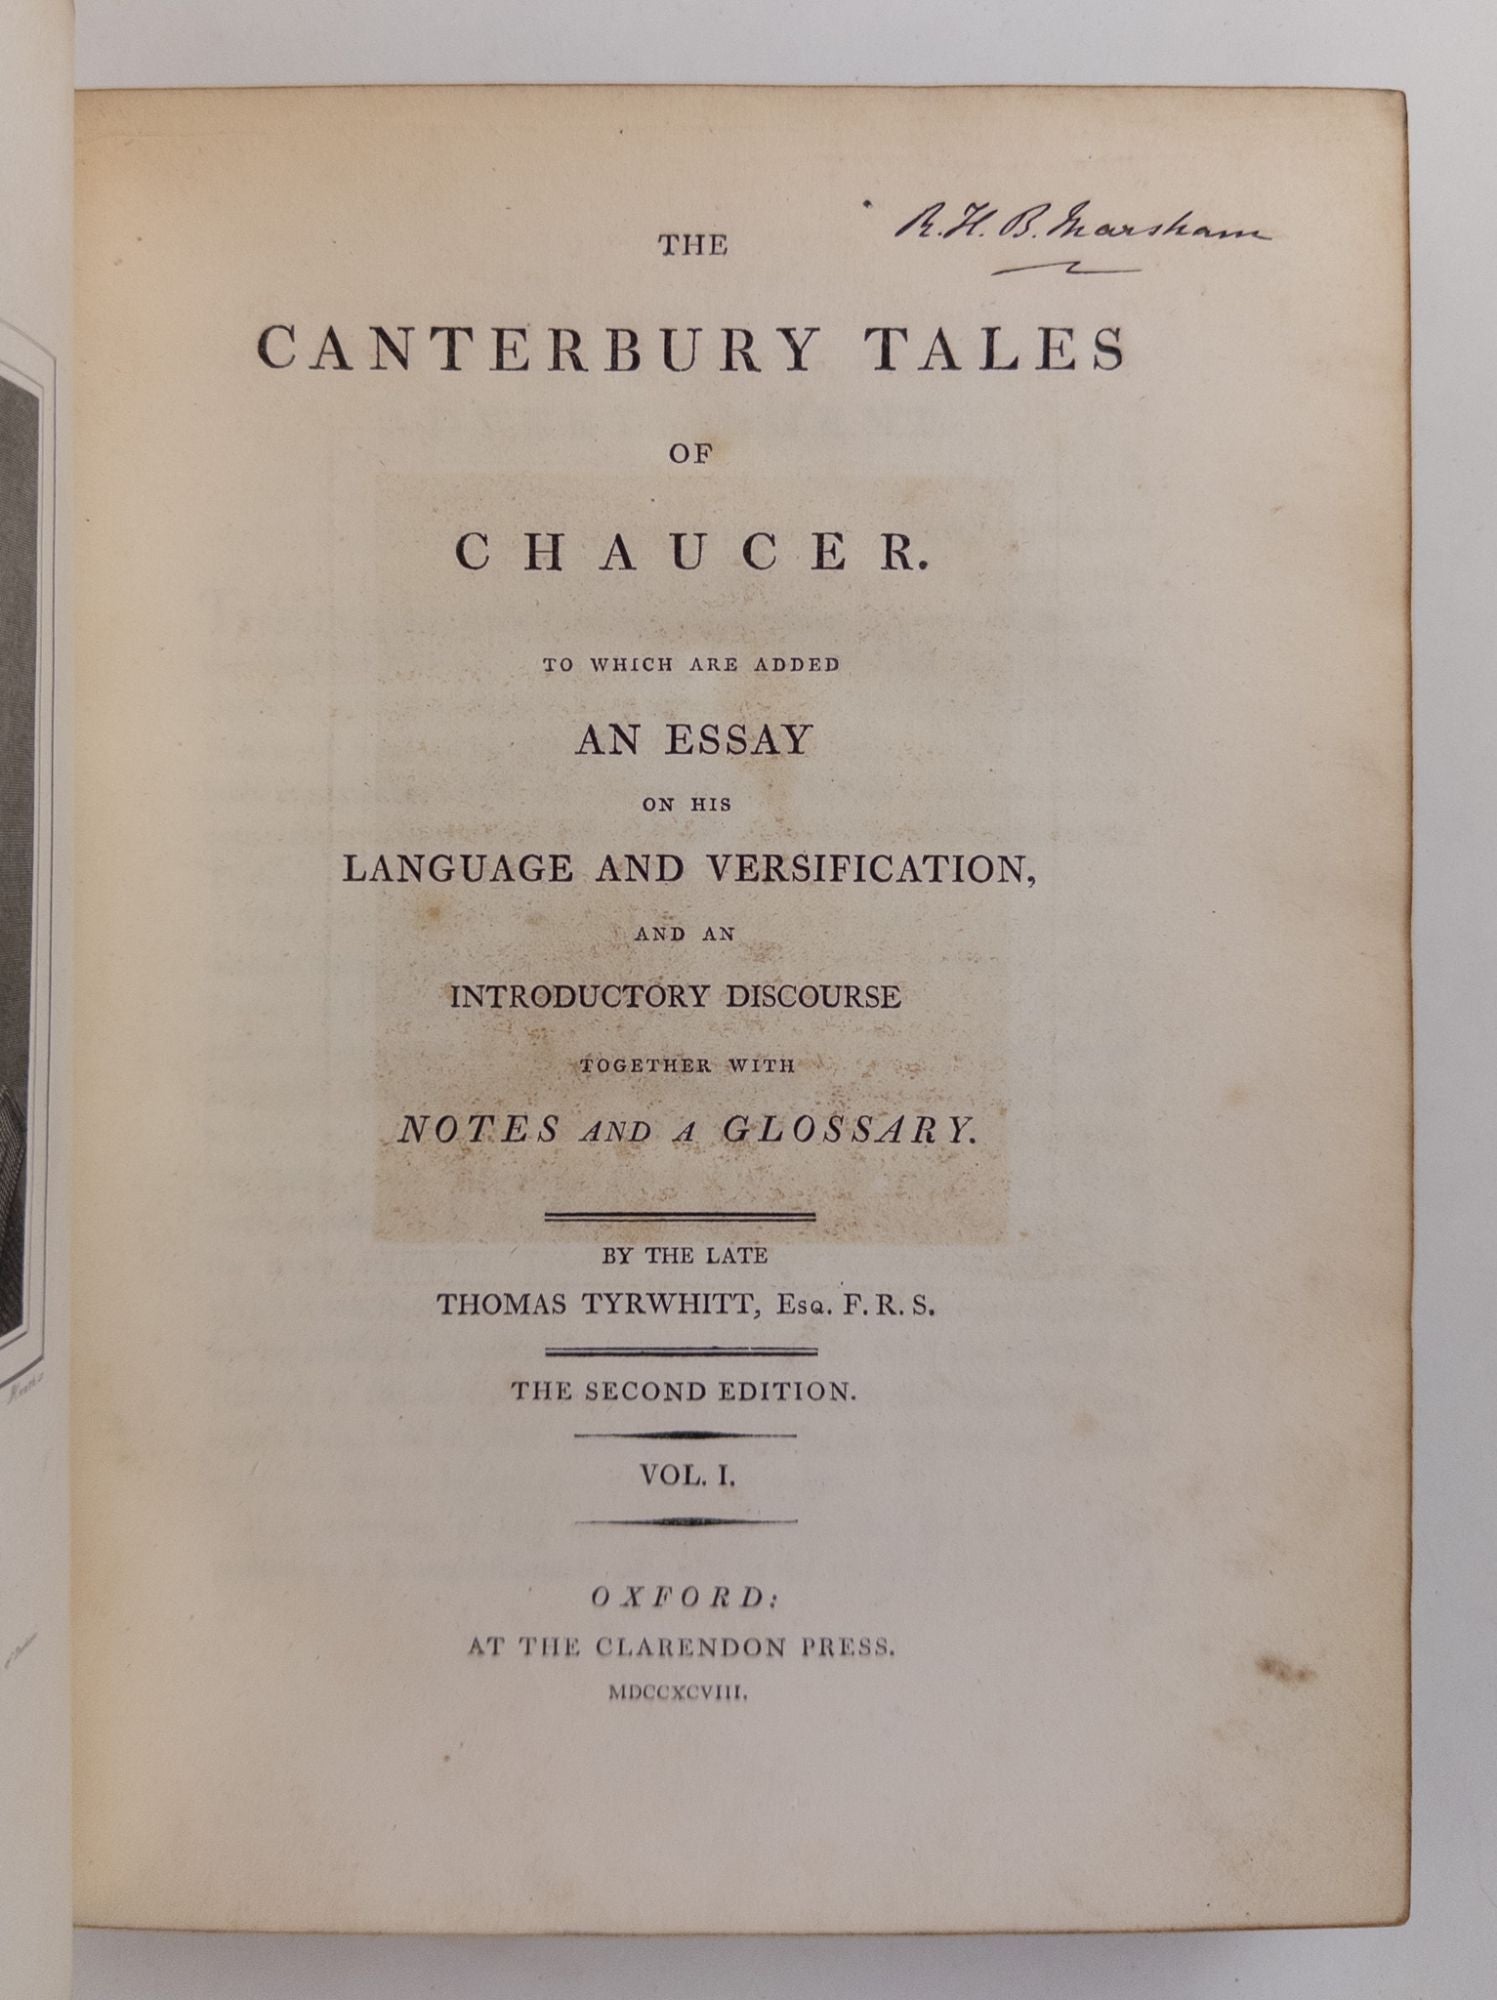 Product Image for THE CANTERBURY TALES OF CHAUCER. TO WHICH ARE ADDED AN ESSAY ON HIS LANGUAGE AND VERSIFICATION, AND AN INTRODUCTORY DISCOURSE: TOGETHER WITH NOTES AND A GLOSSARY. [Two volumes]